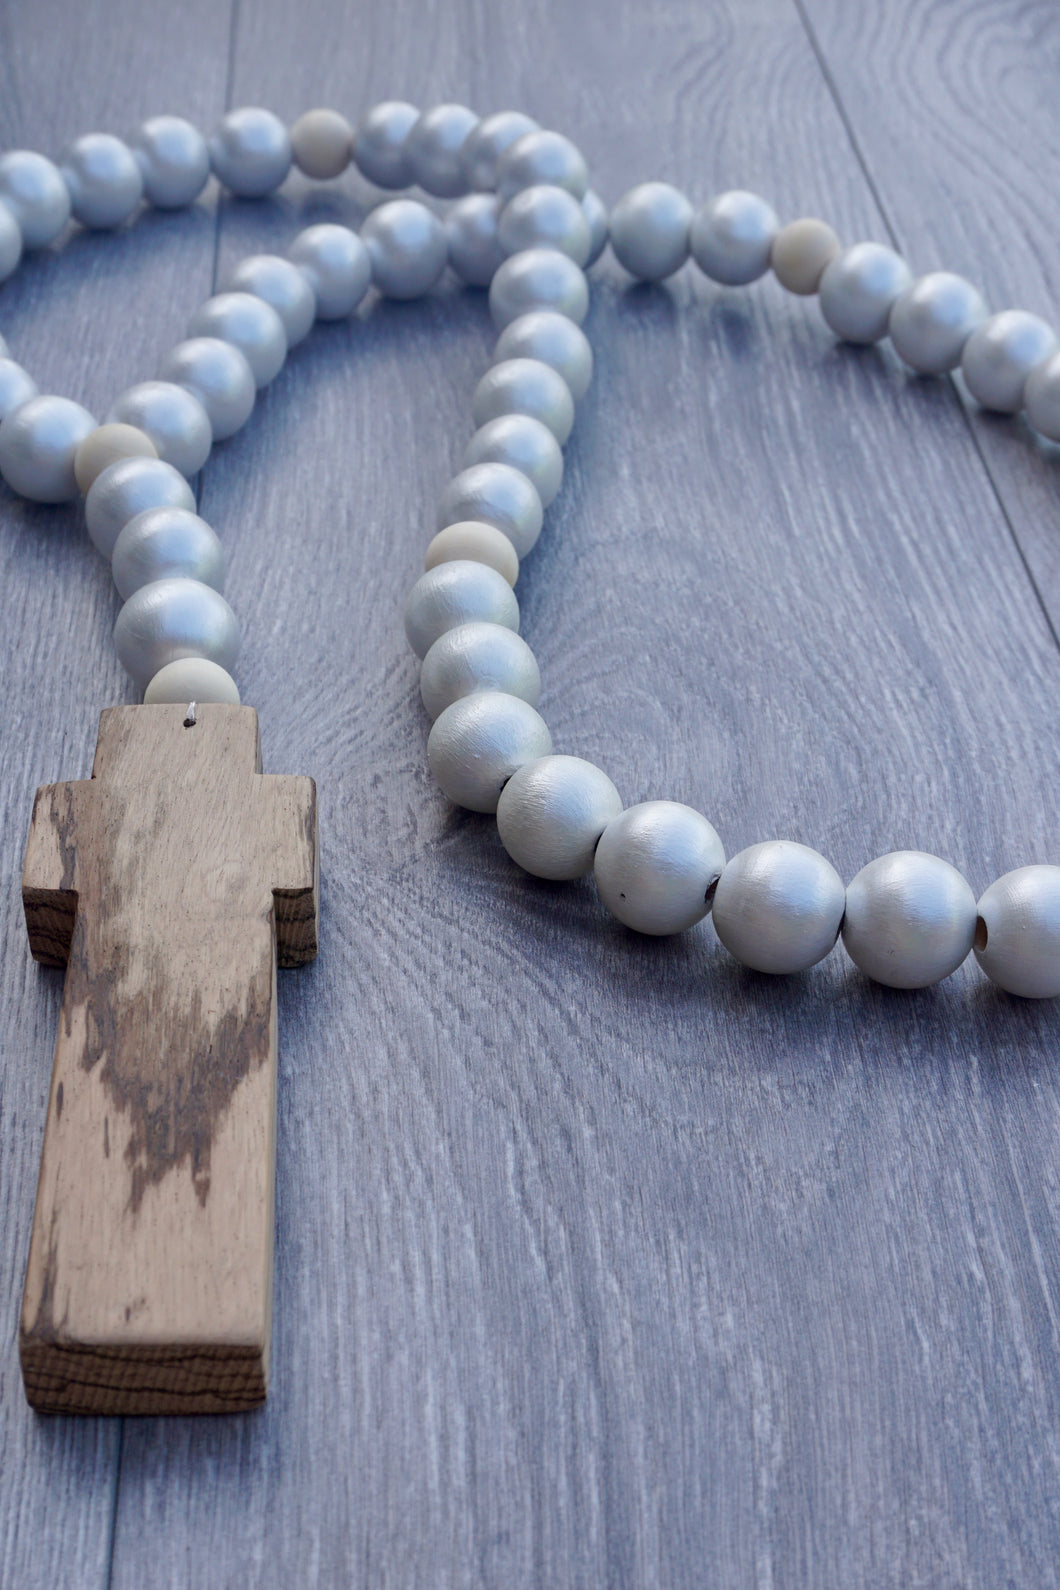 Handcrafted Wooden Cross + Hand painted Pearl Beads